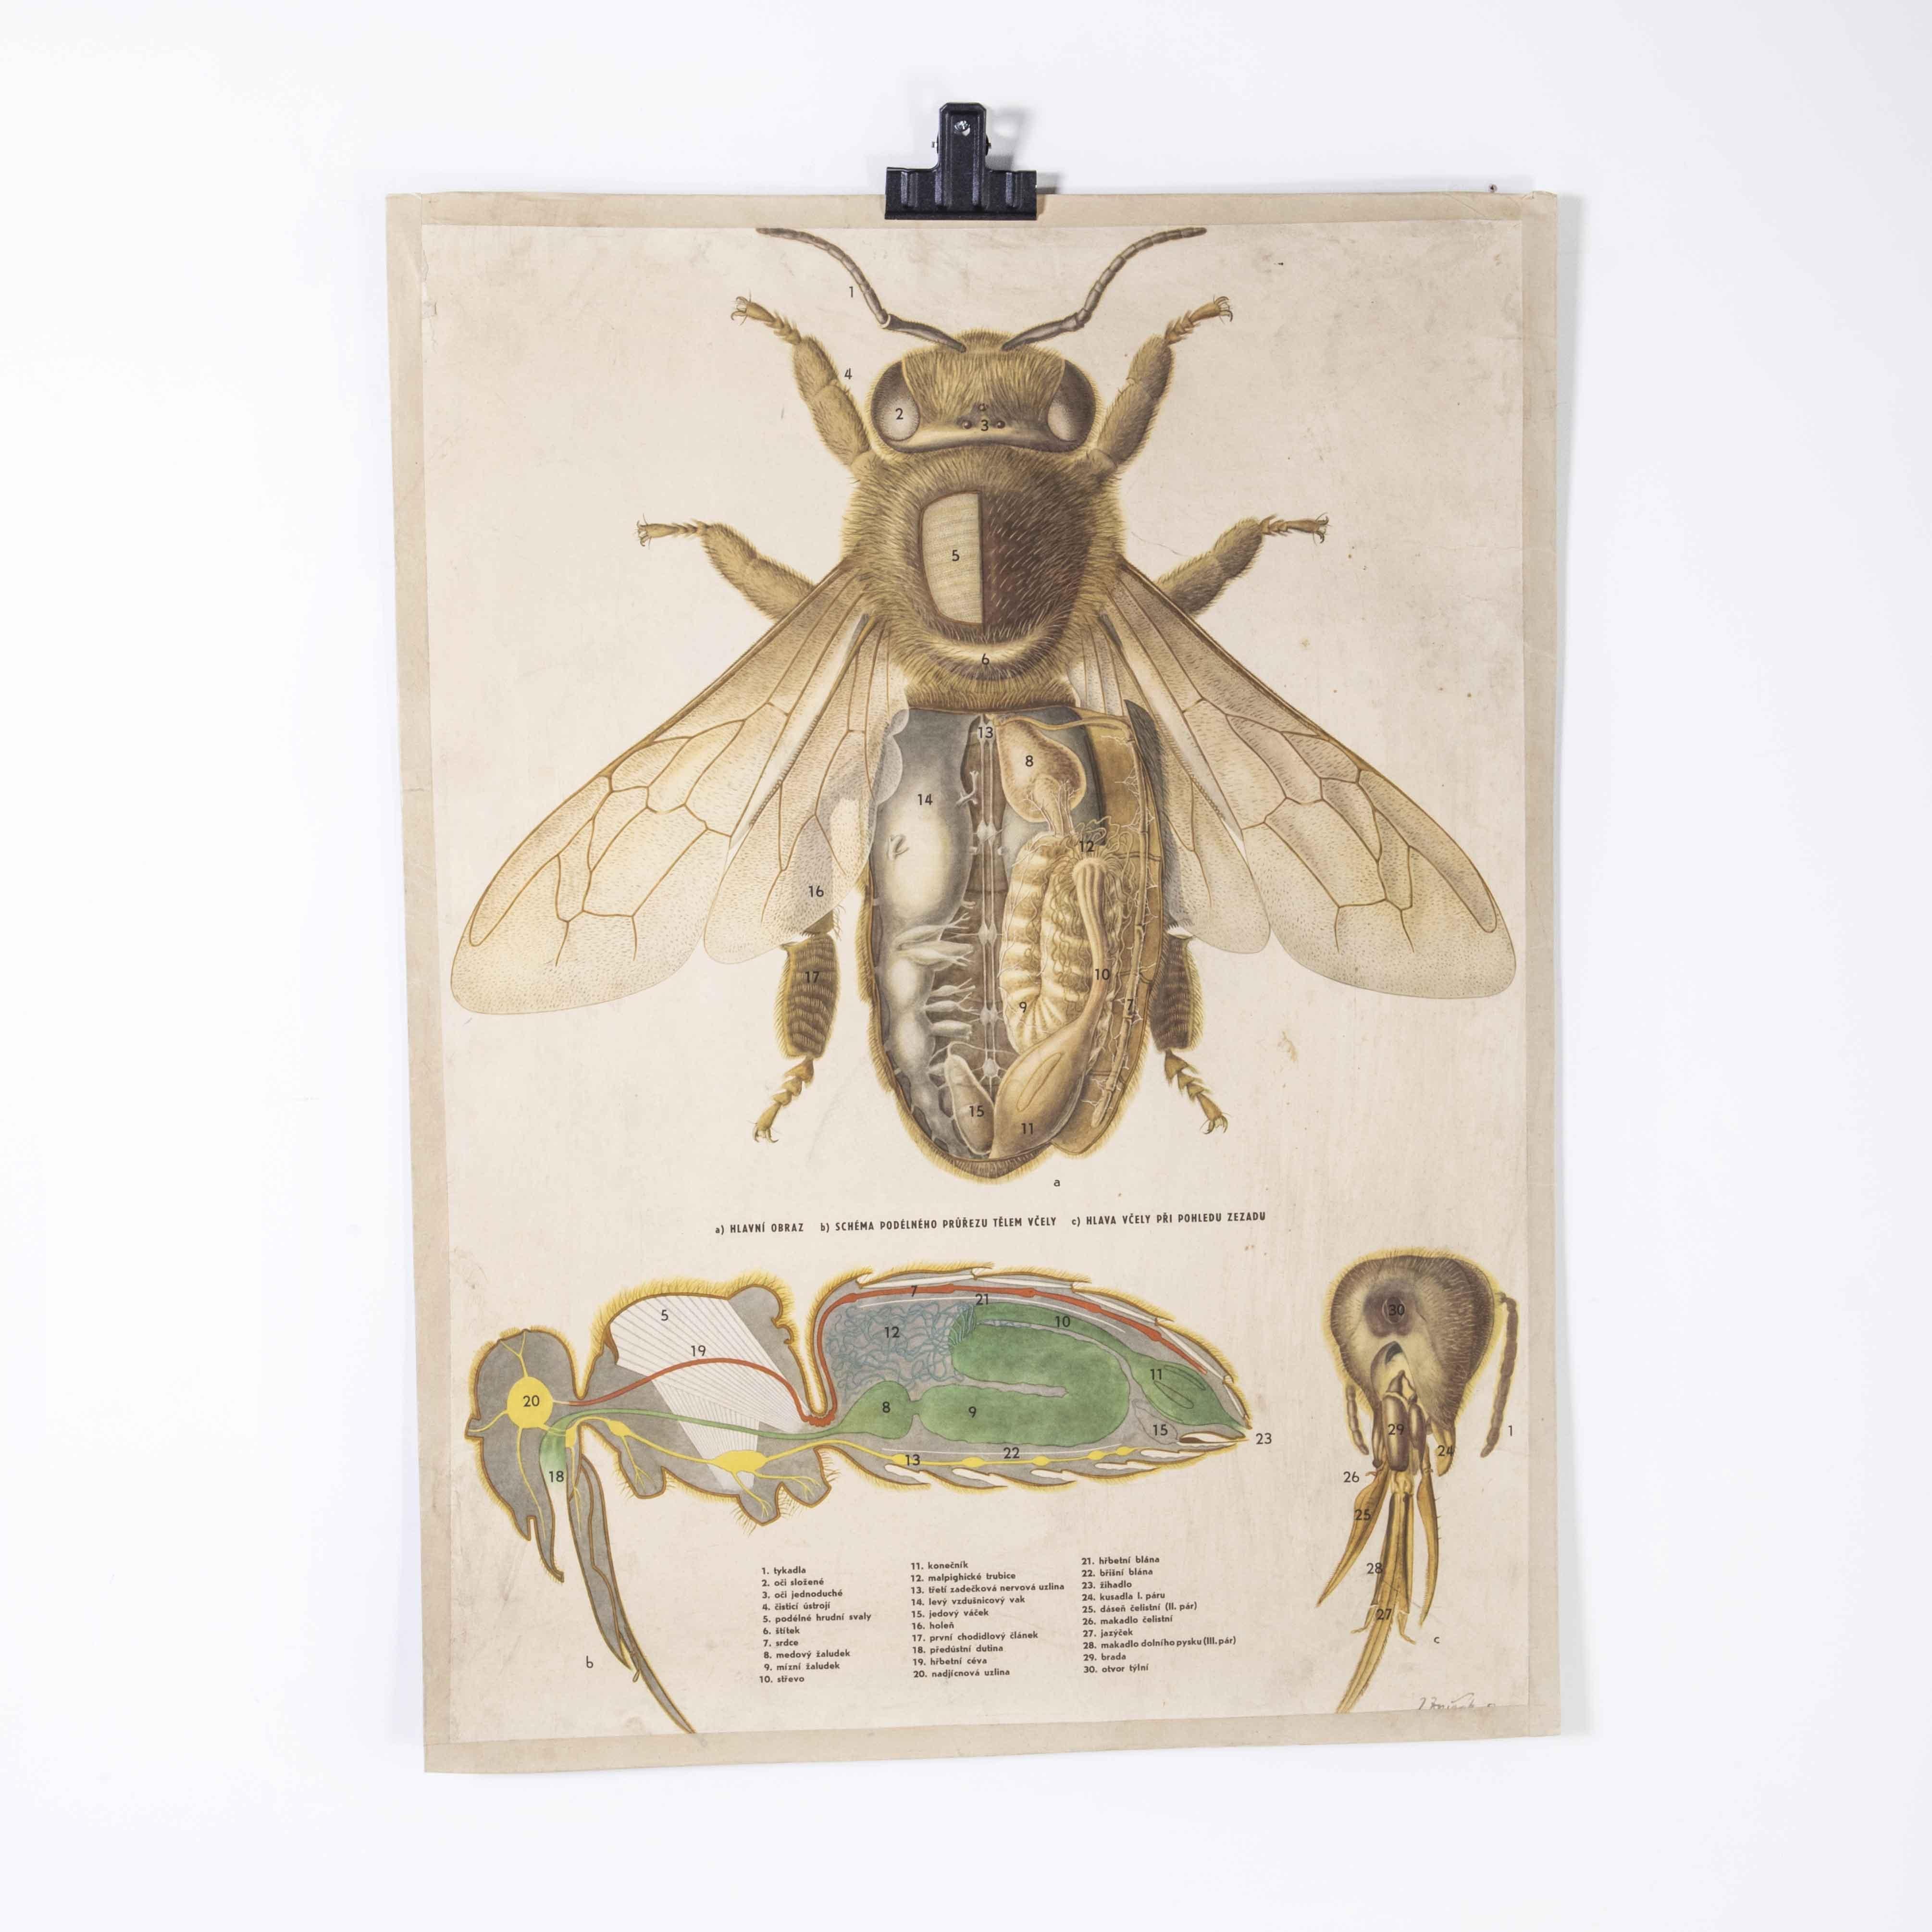 1950’s Single Fly Anatomy Educational Poster
1950’s Single Fly Anatomy Educational Poster. 20th century Czechoslovakian educational chart. A rare and vintage wall chart from the Czech Republic illustrating a fly and its anatomy. This heavyweight